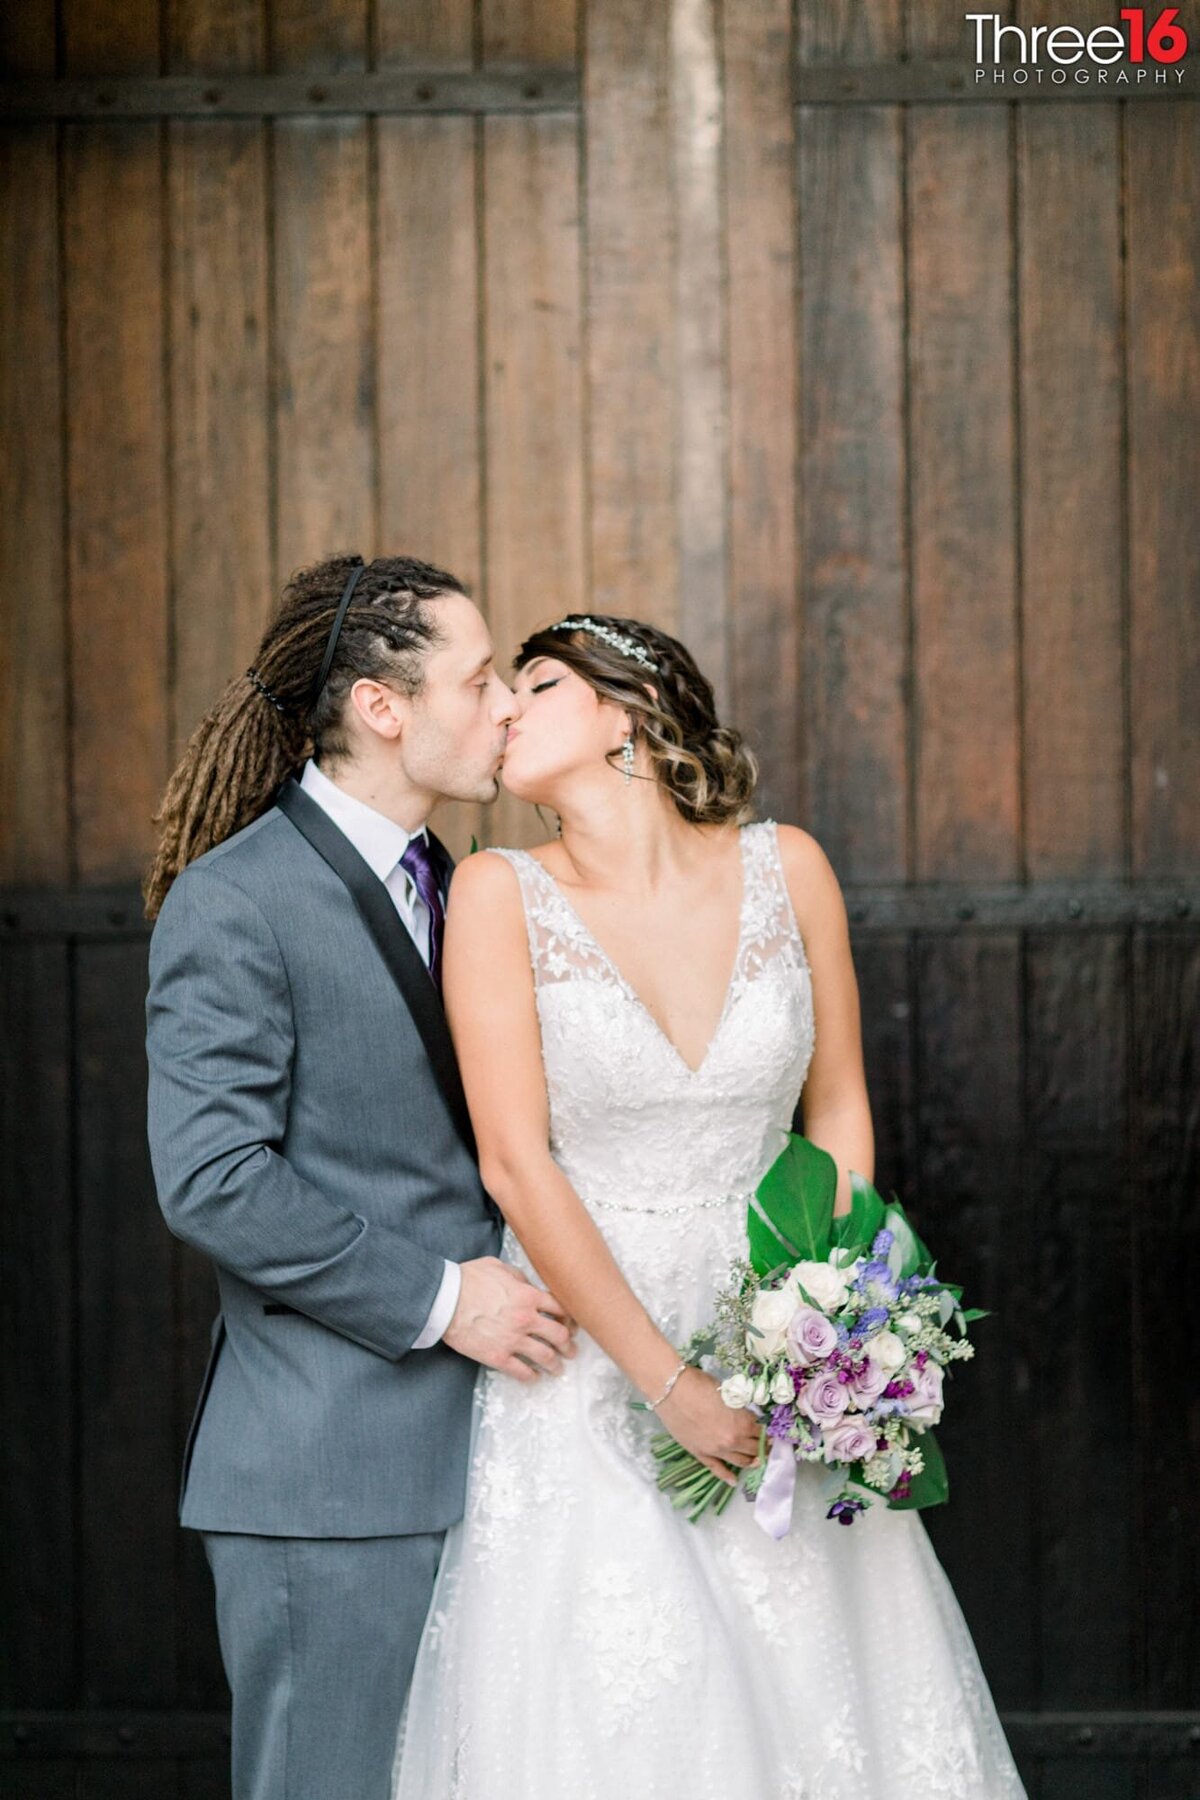 Tender kiss between Bride and Groom during photo session